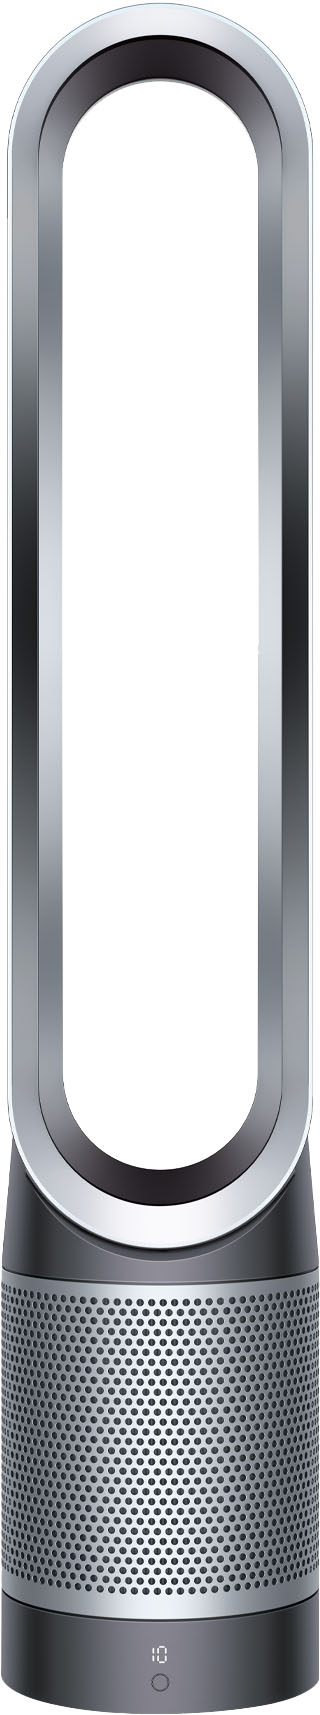 Angle View: Dyson - Pure Cool Link - TP02 - Smart Tower Air Purifier and Fan - Nickel